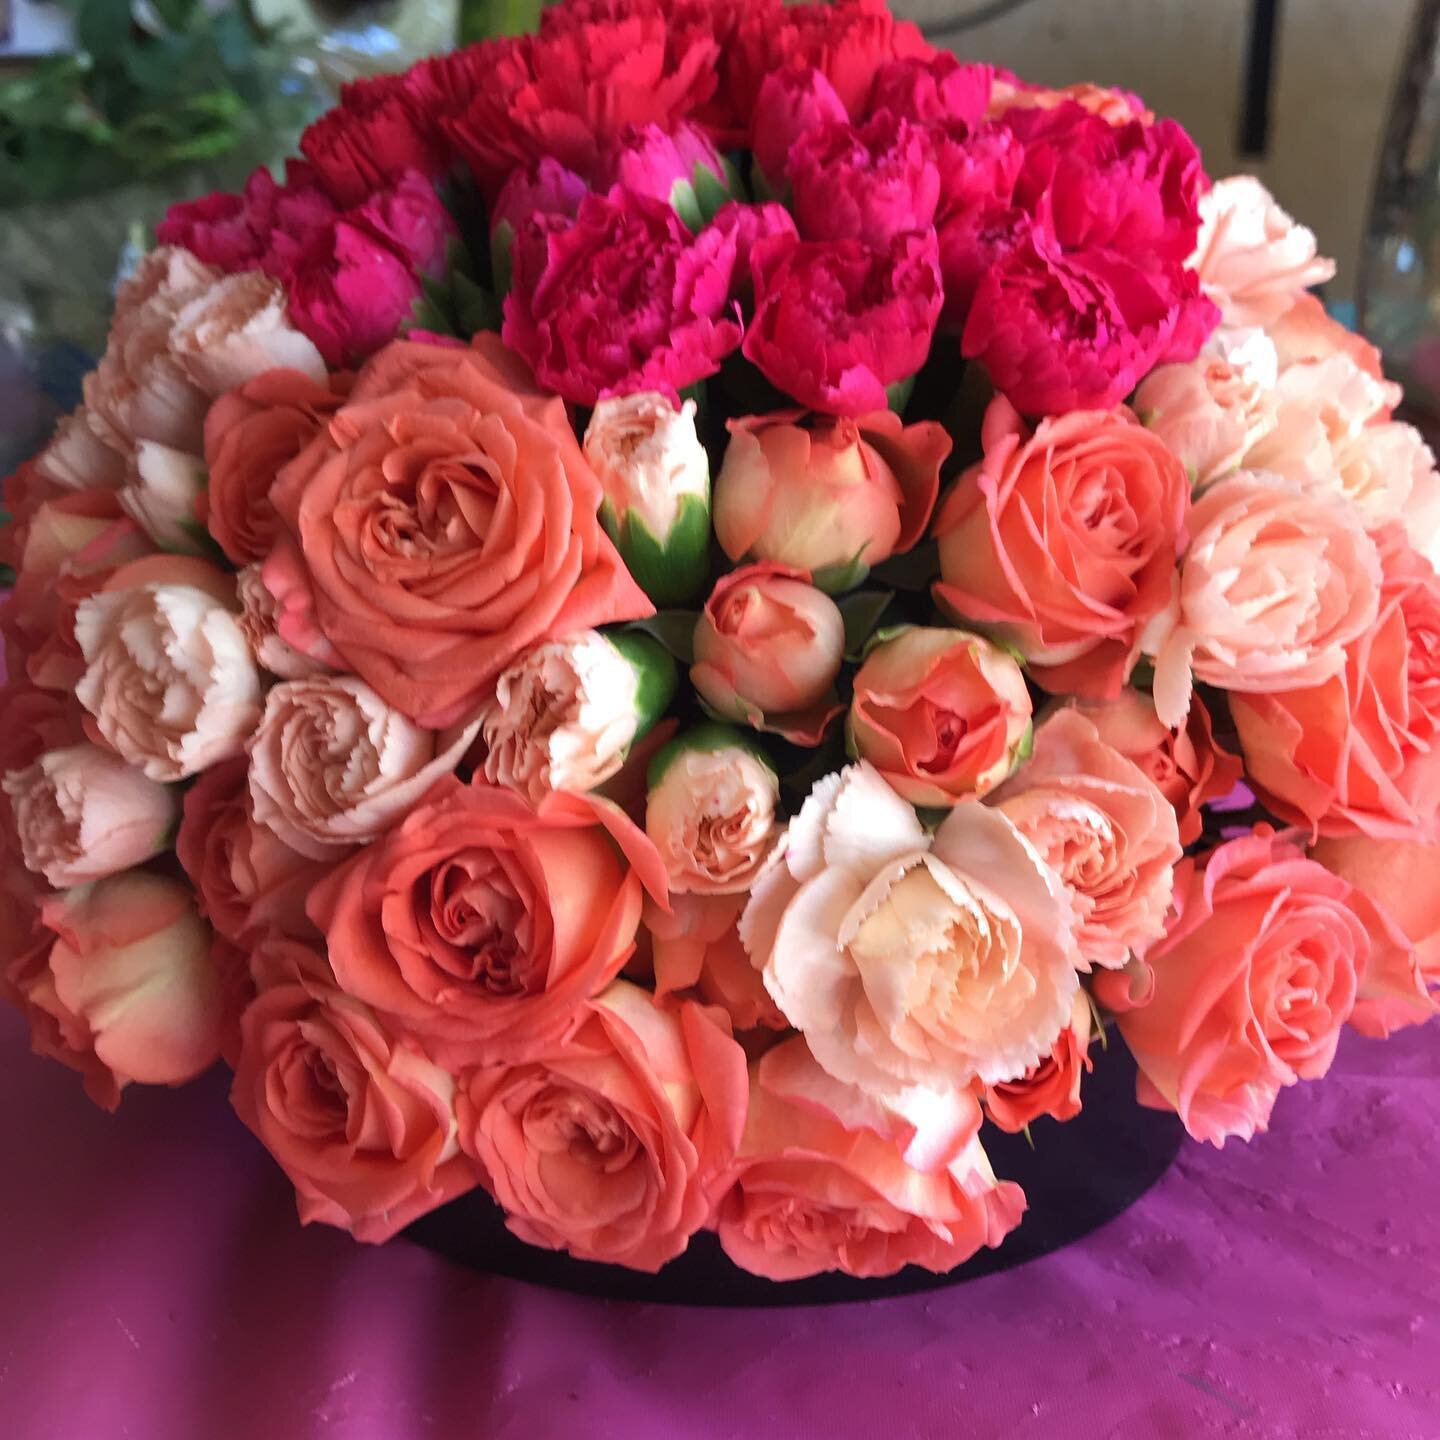 Here are spray roses mixed with baby carnations to make the perfect surprise for a special young lady! We call this Puppy Love @princessc5 @angelique.vaca @steeyna